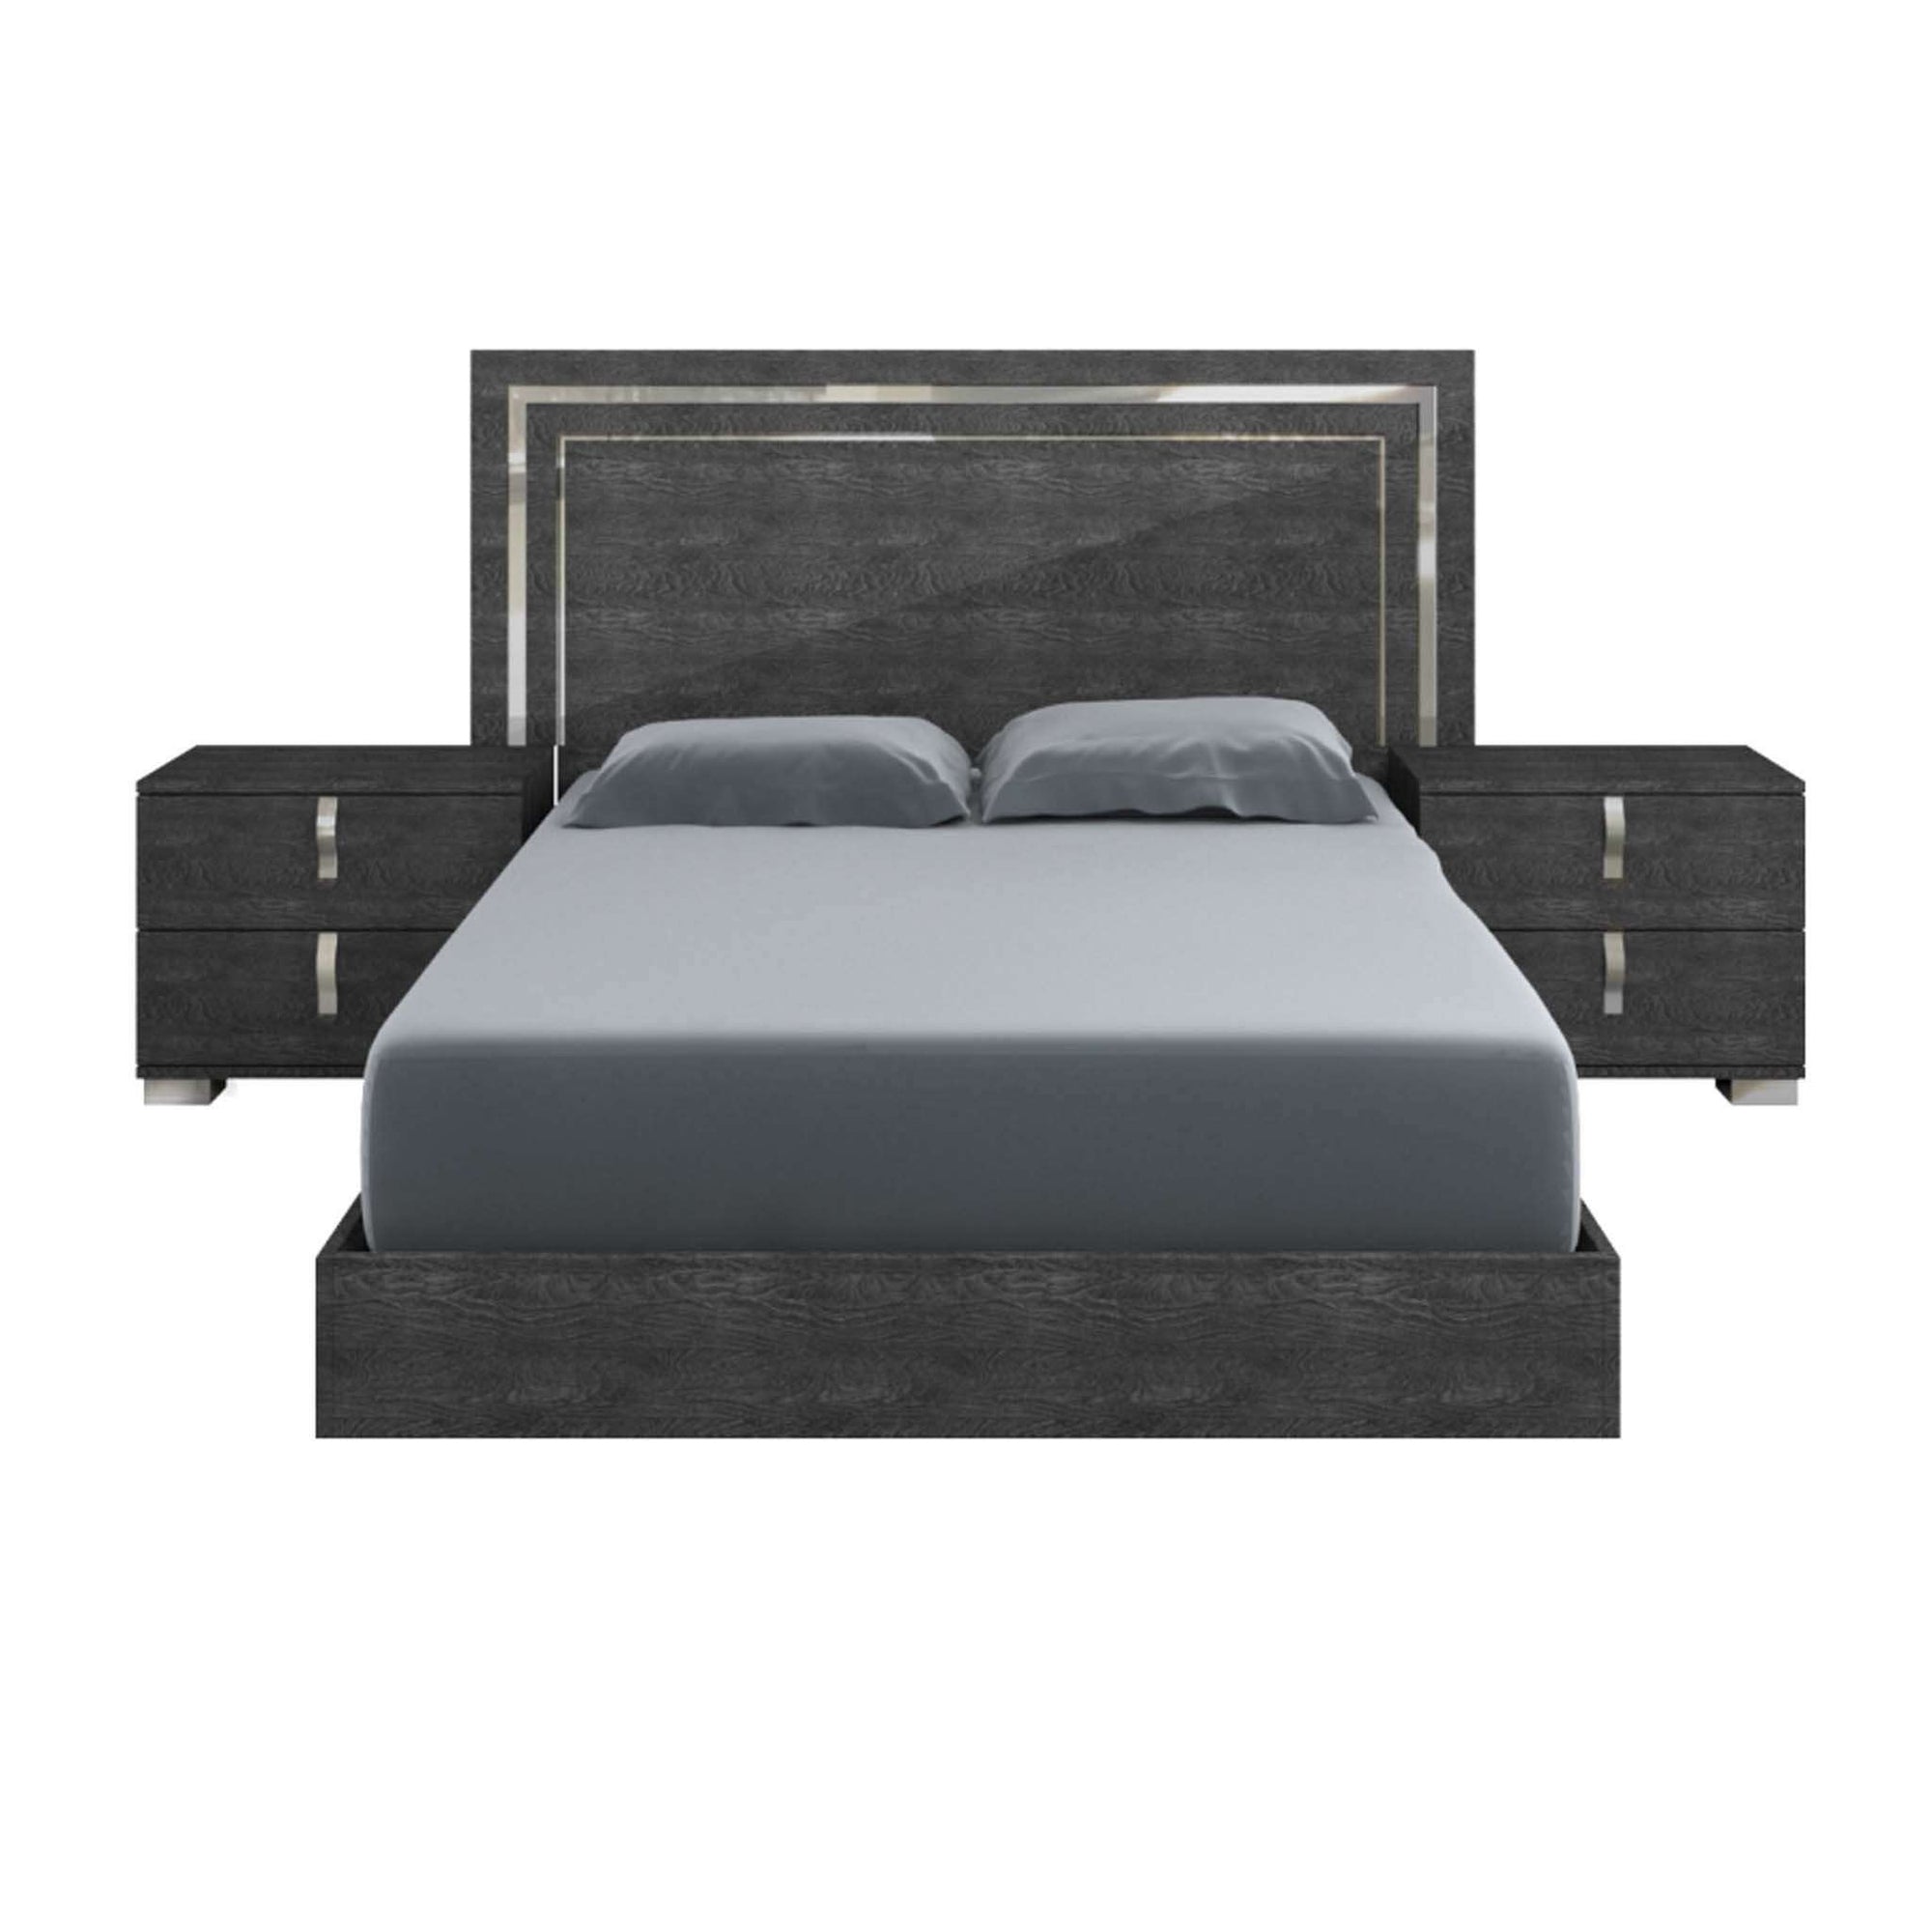 Star International Furniture-Noble Cal King Bed-Bed-MODTEMPO